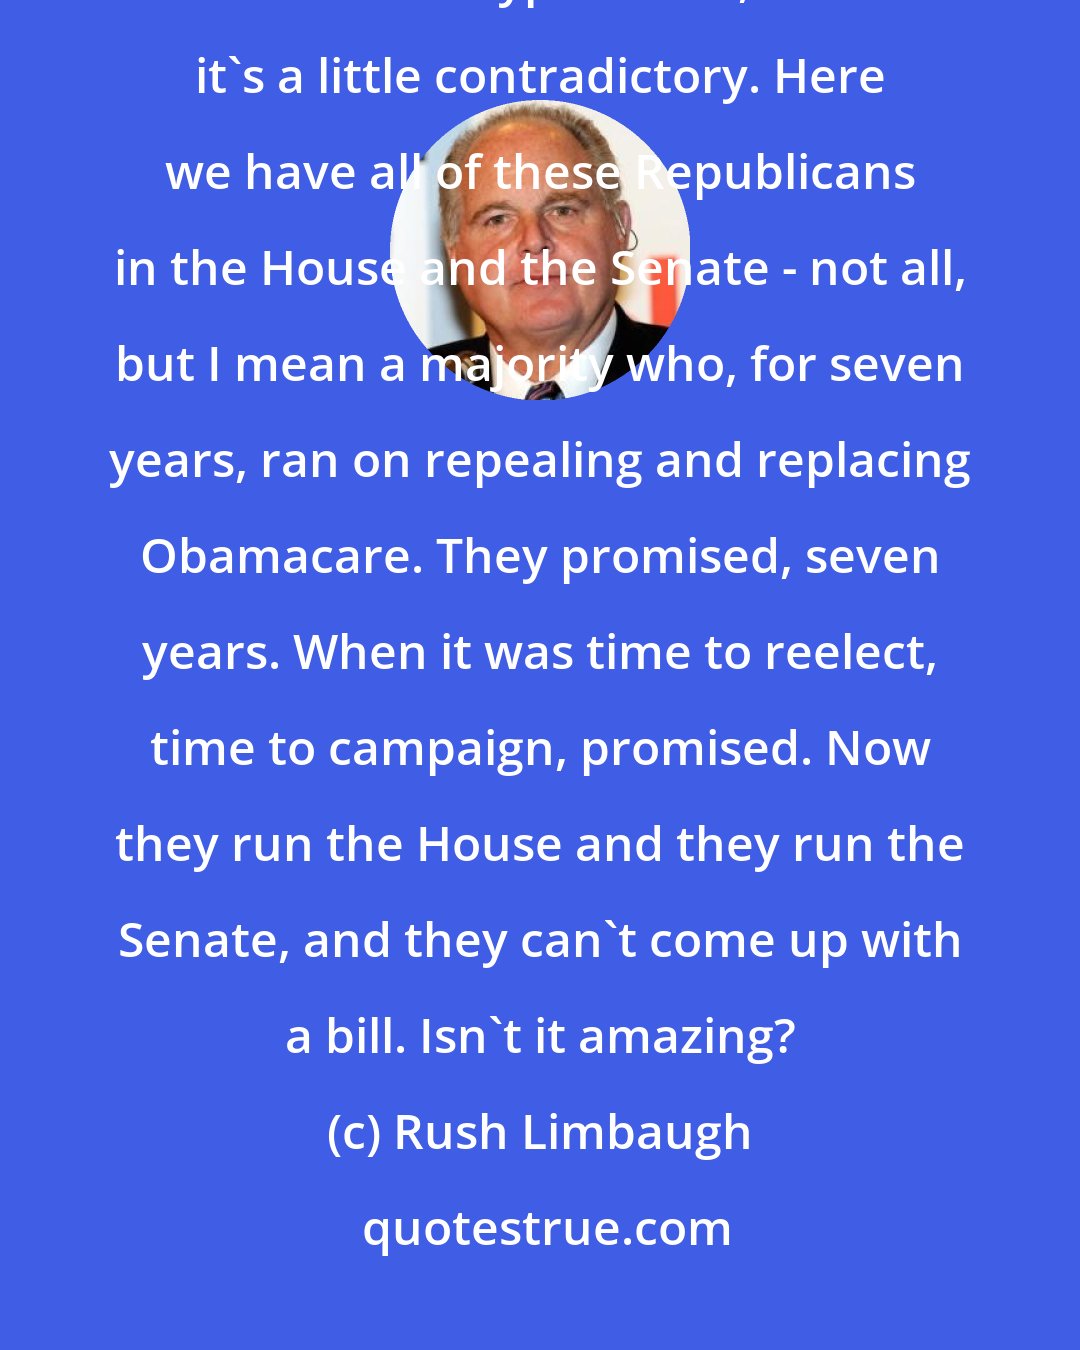 Rush Limbaugh: It's not a big deal, but it's quite noticeable and obvious to me, and it's a little hypocritical, and it's a little contradictory. Here we have all of these Republicans in the House and the Senate - not all, but I mean a majority who, for seven years, ran on repealing and replacing Obamacare. They promised, seven years. When it was time to reelect, time to campaign, promised. Now they run the House and they run the Senate, and they can't come up with a bill. Isn't it amazing?